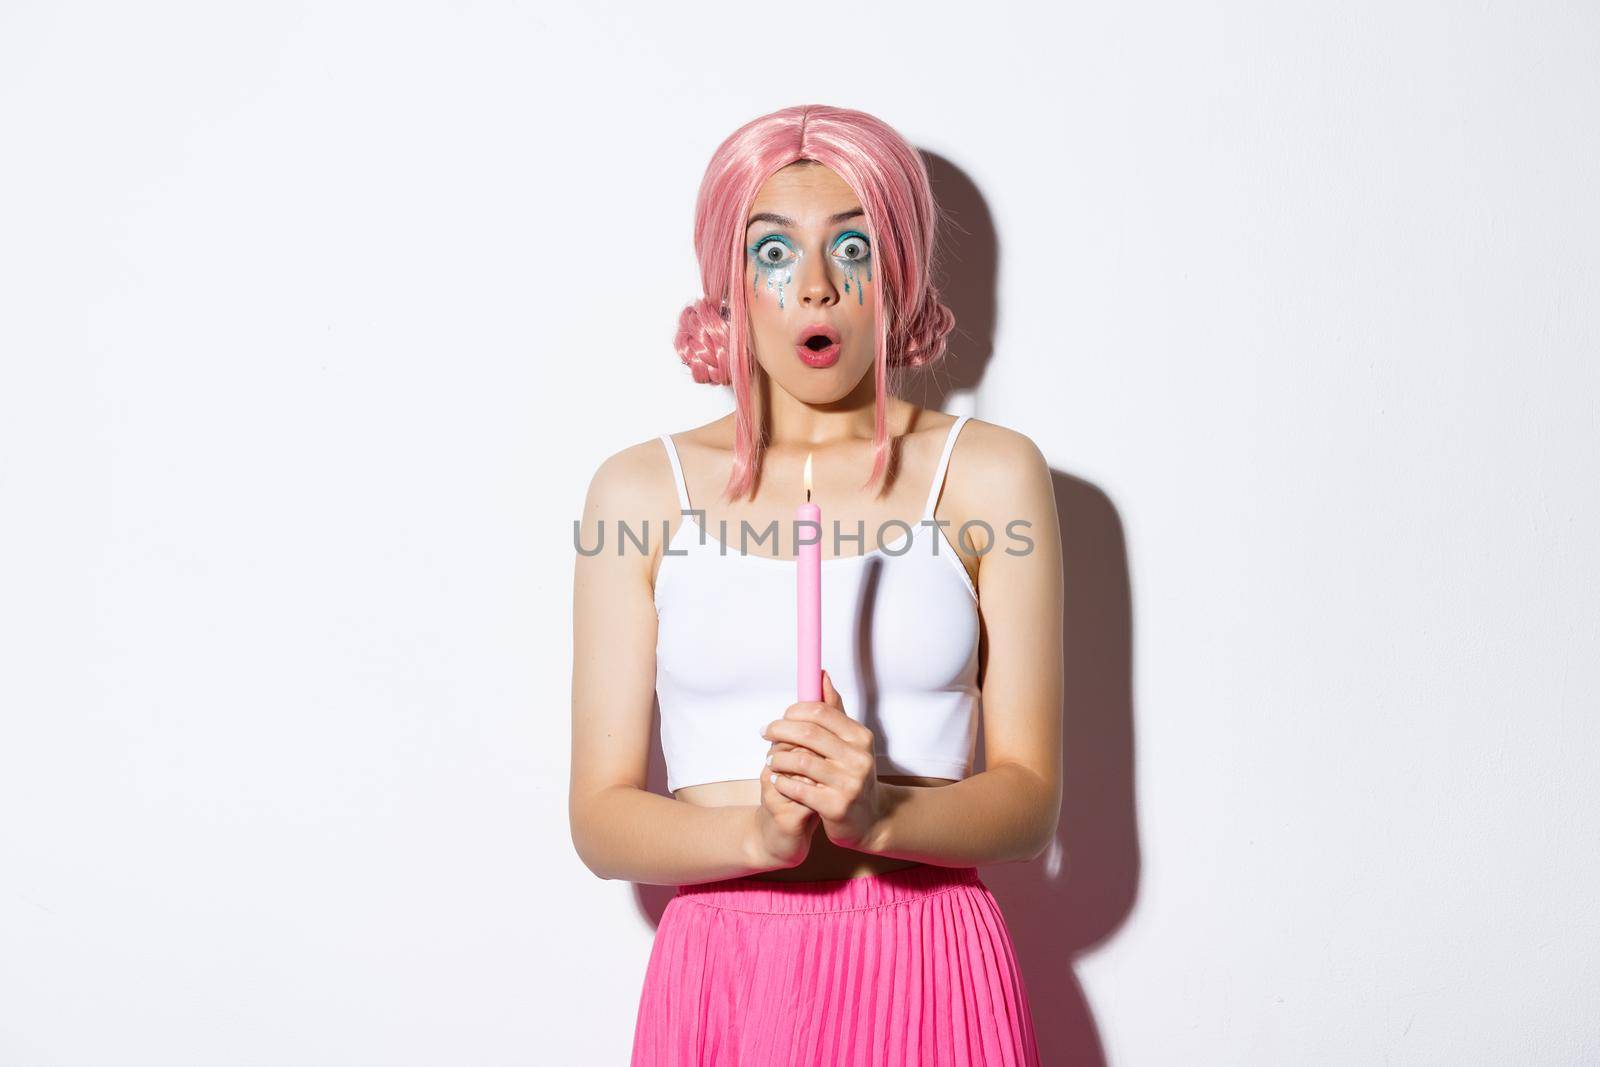 Portrait of shocked girl casting magic spells on halloween, holding candle and looking amazed, standing in costume with pink wig and bright makeup.